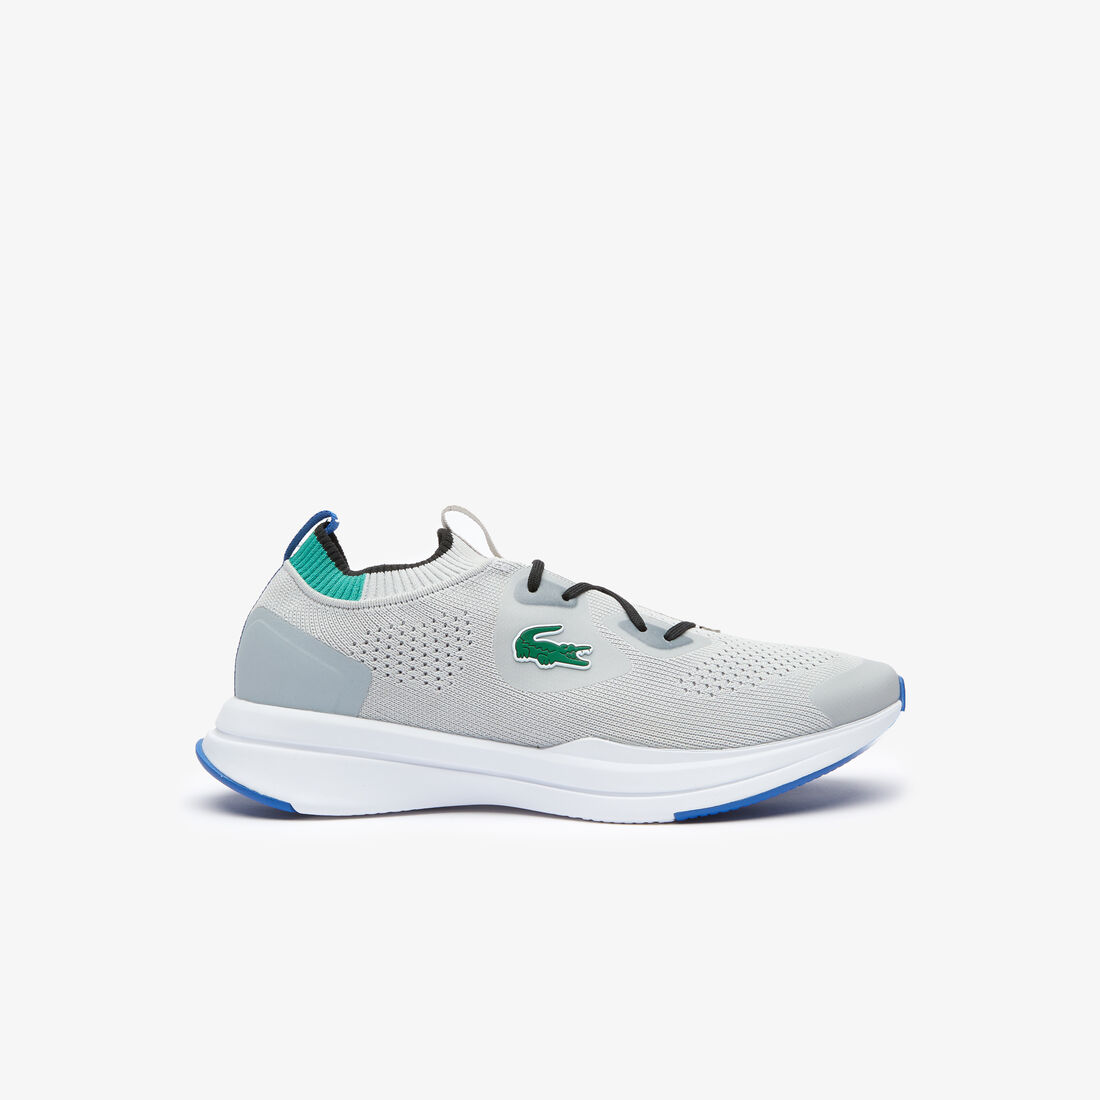 Men's Lacoste Run Spin Knit Textile Sneakers